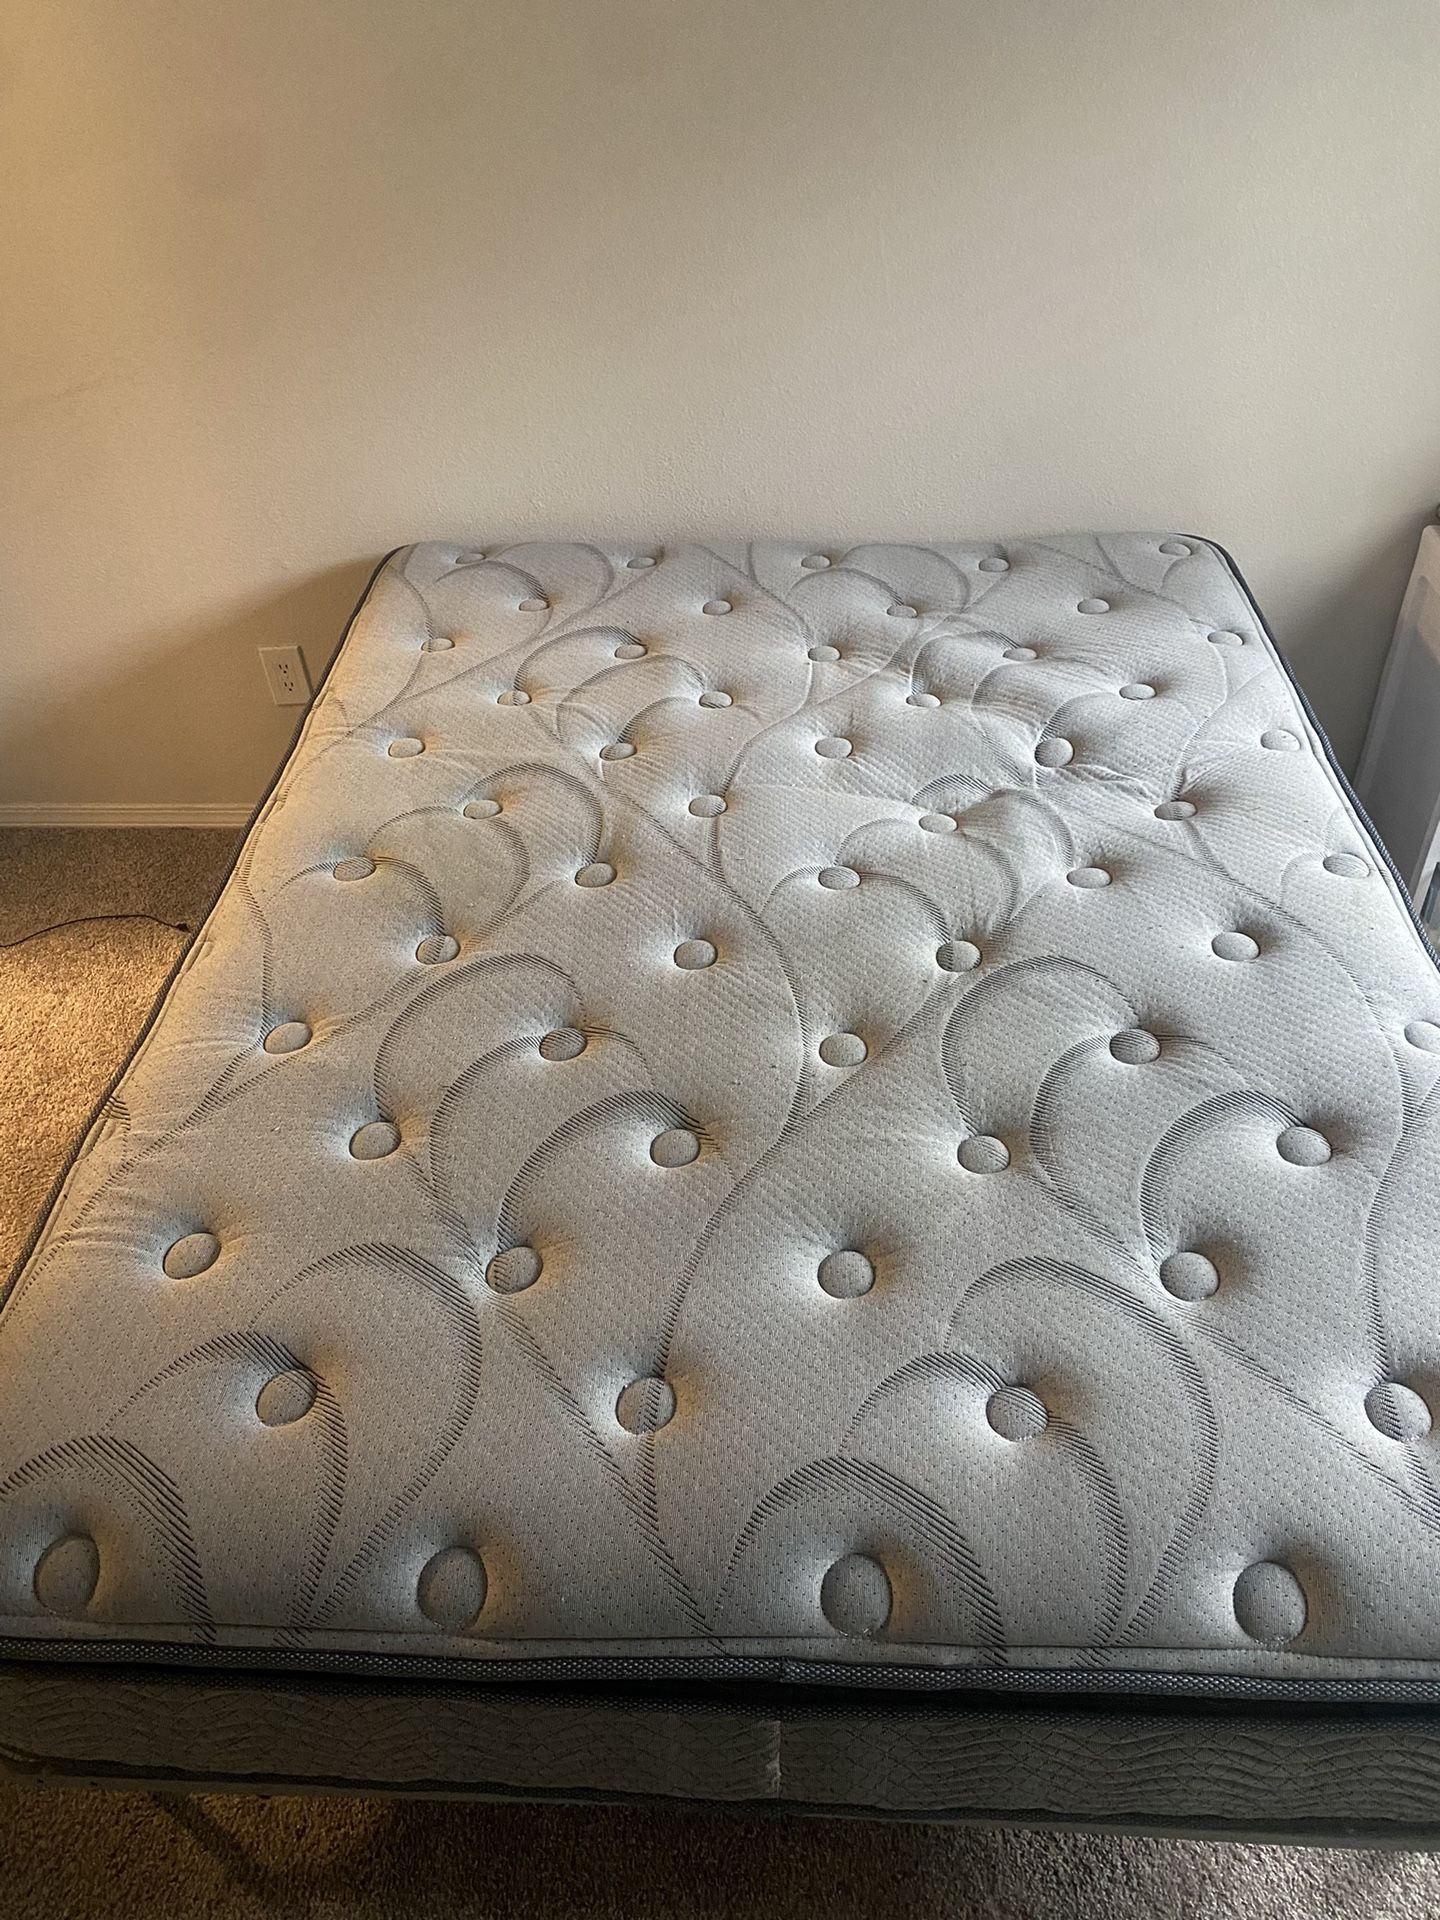 Ashley’s Queen Size Mattress With Frame